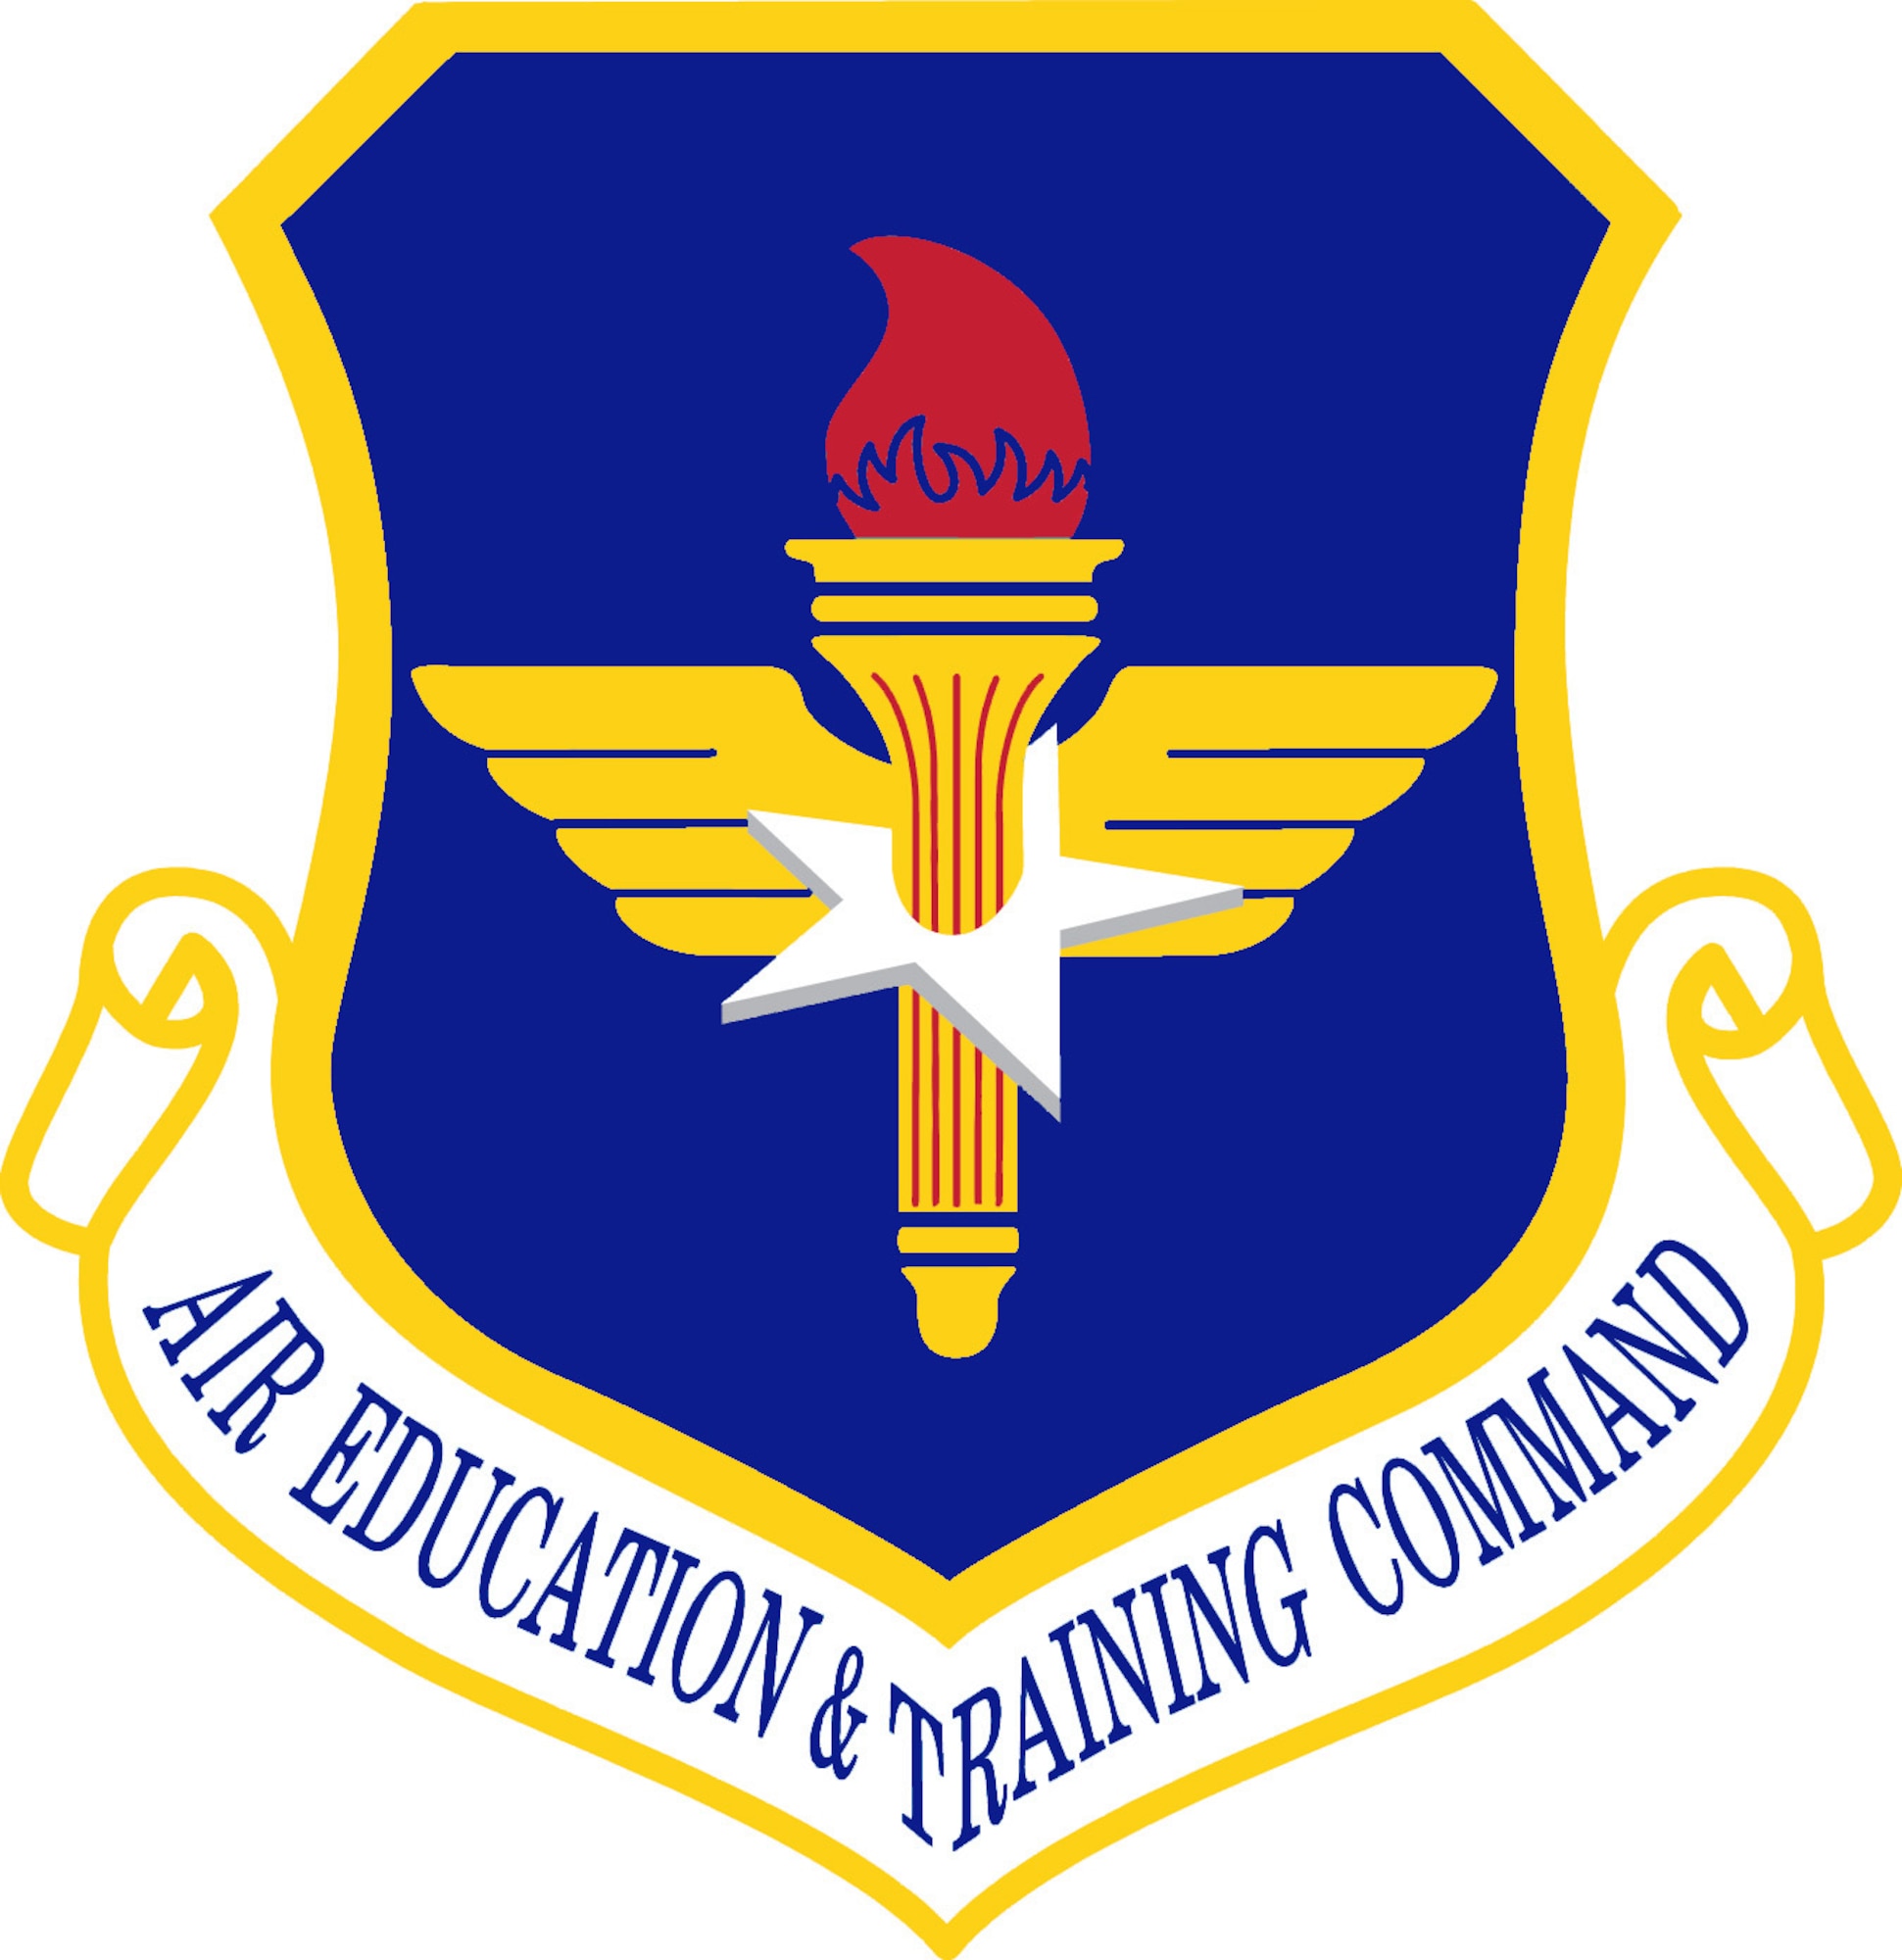 Air Education & Training Command (AETC) Shield (Color), U.S. Air Force graphic.  In accordance with Chapter 3 of AFI 84-105, commercial reproduction of this emblem is NOT permitted without the permission of the proponent organizational/unit commander. 